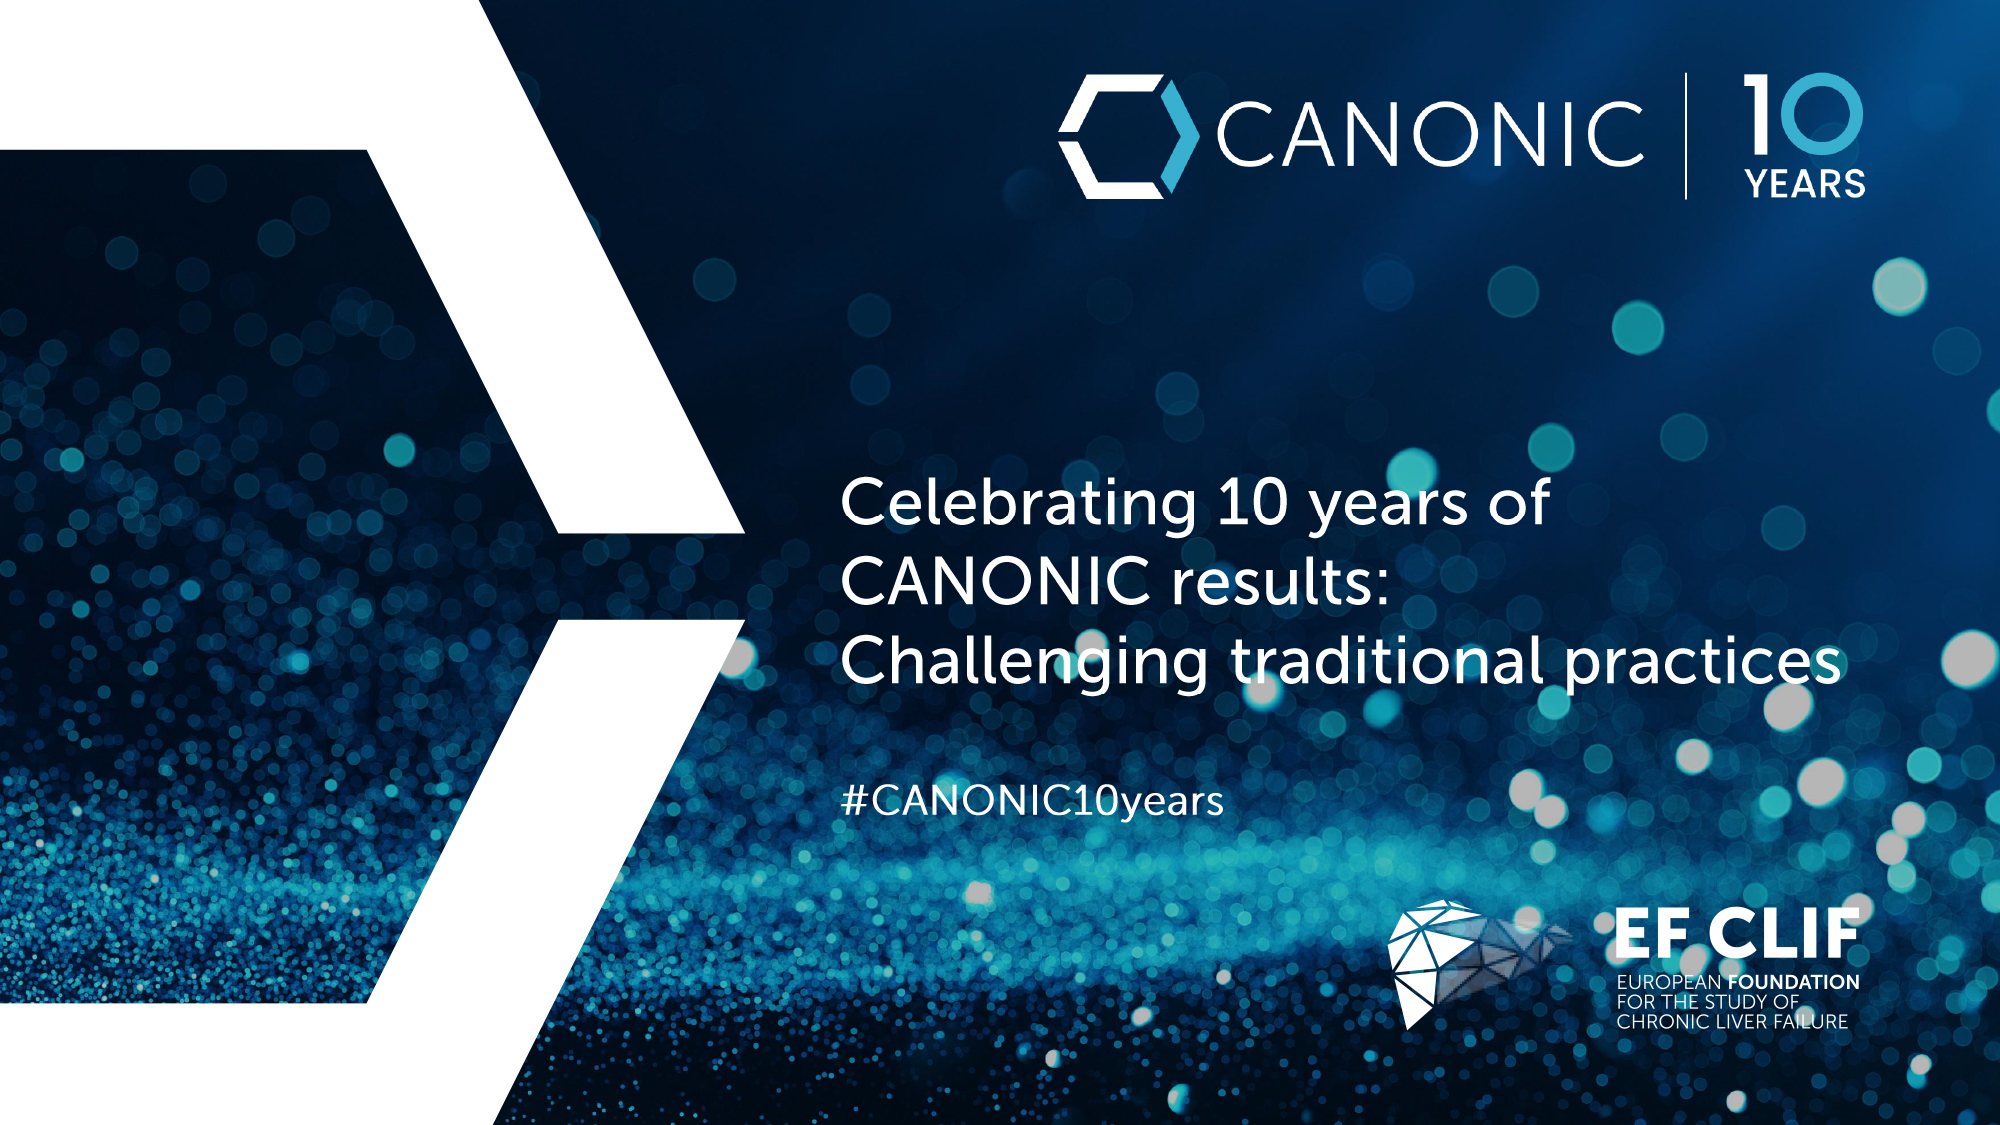 Celebrating 10 years of CANONIC: Challenging traditional practices